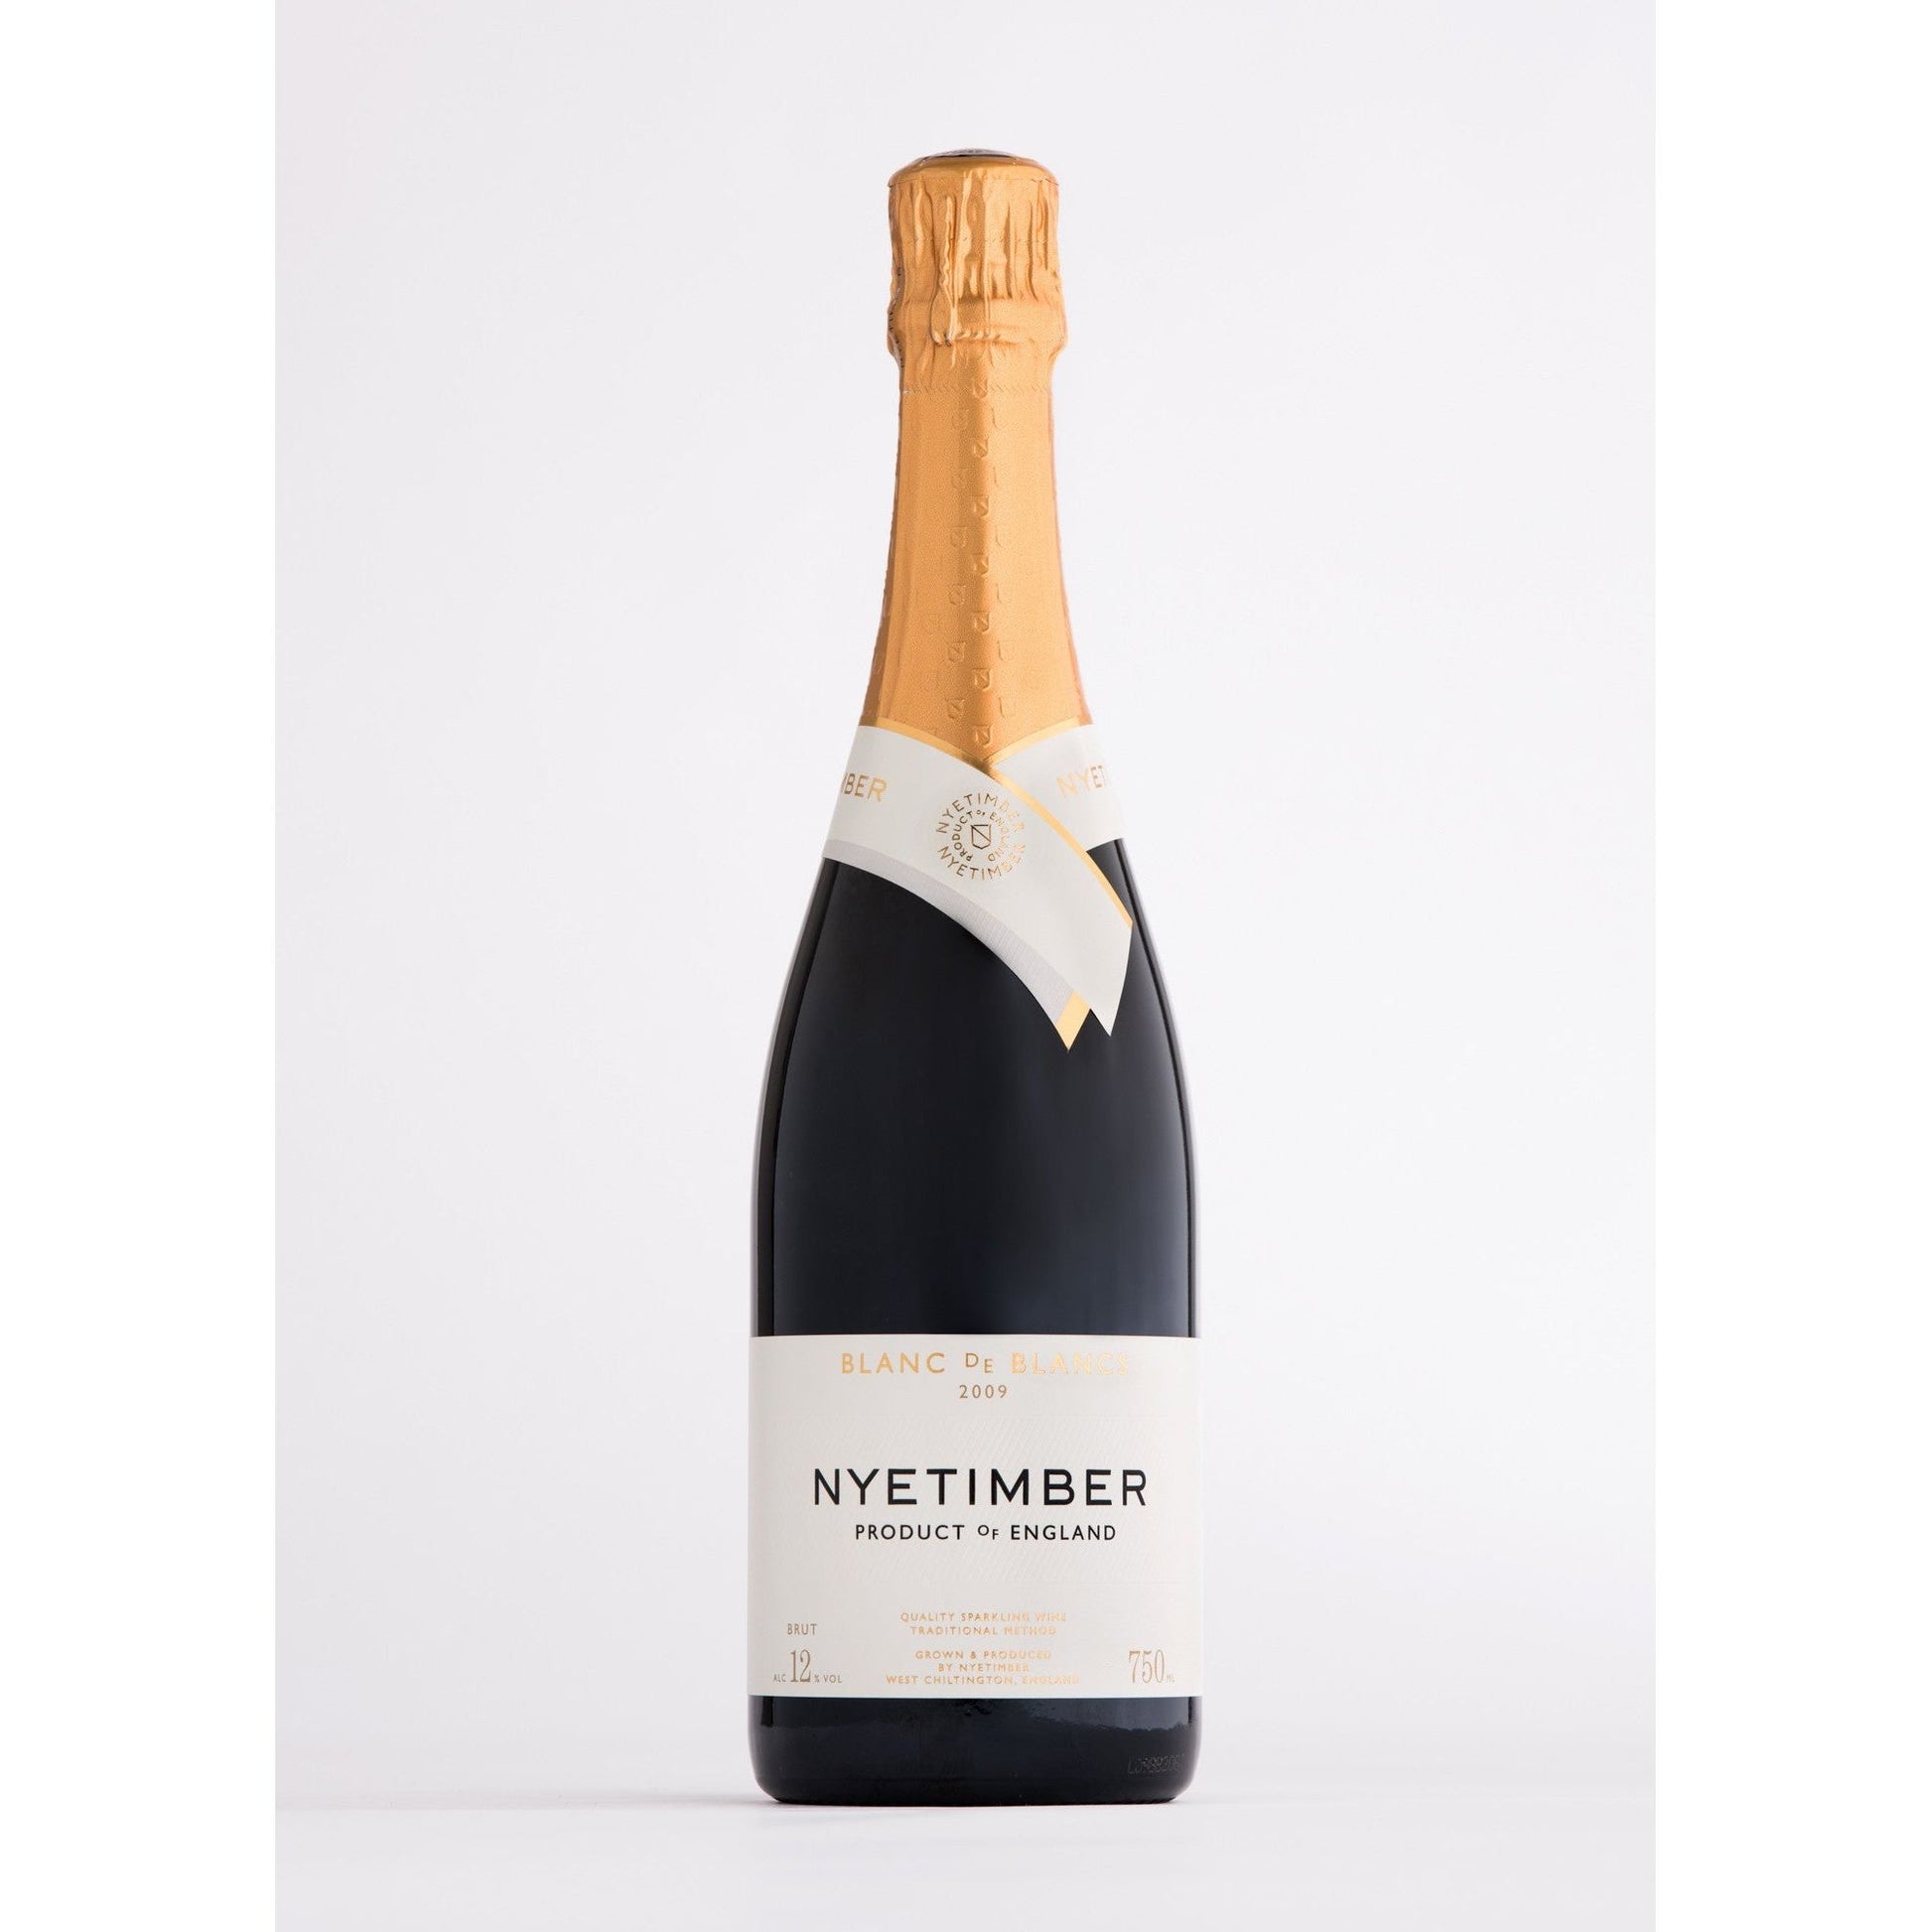 Nyetimber Blanc de Blanc Brut Sparkling wine from the English Wine Collection